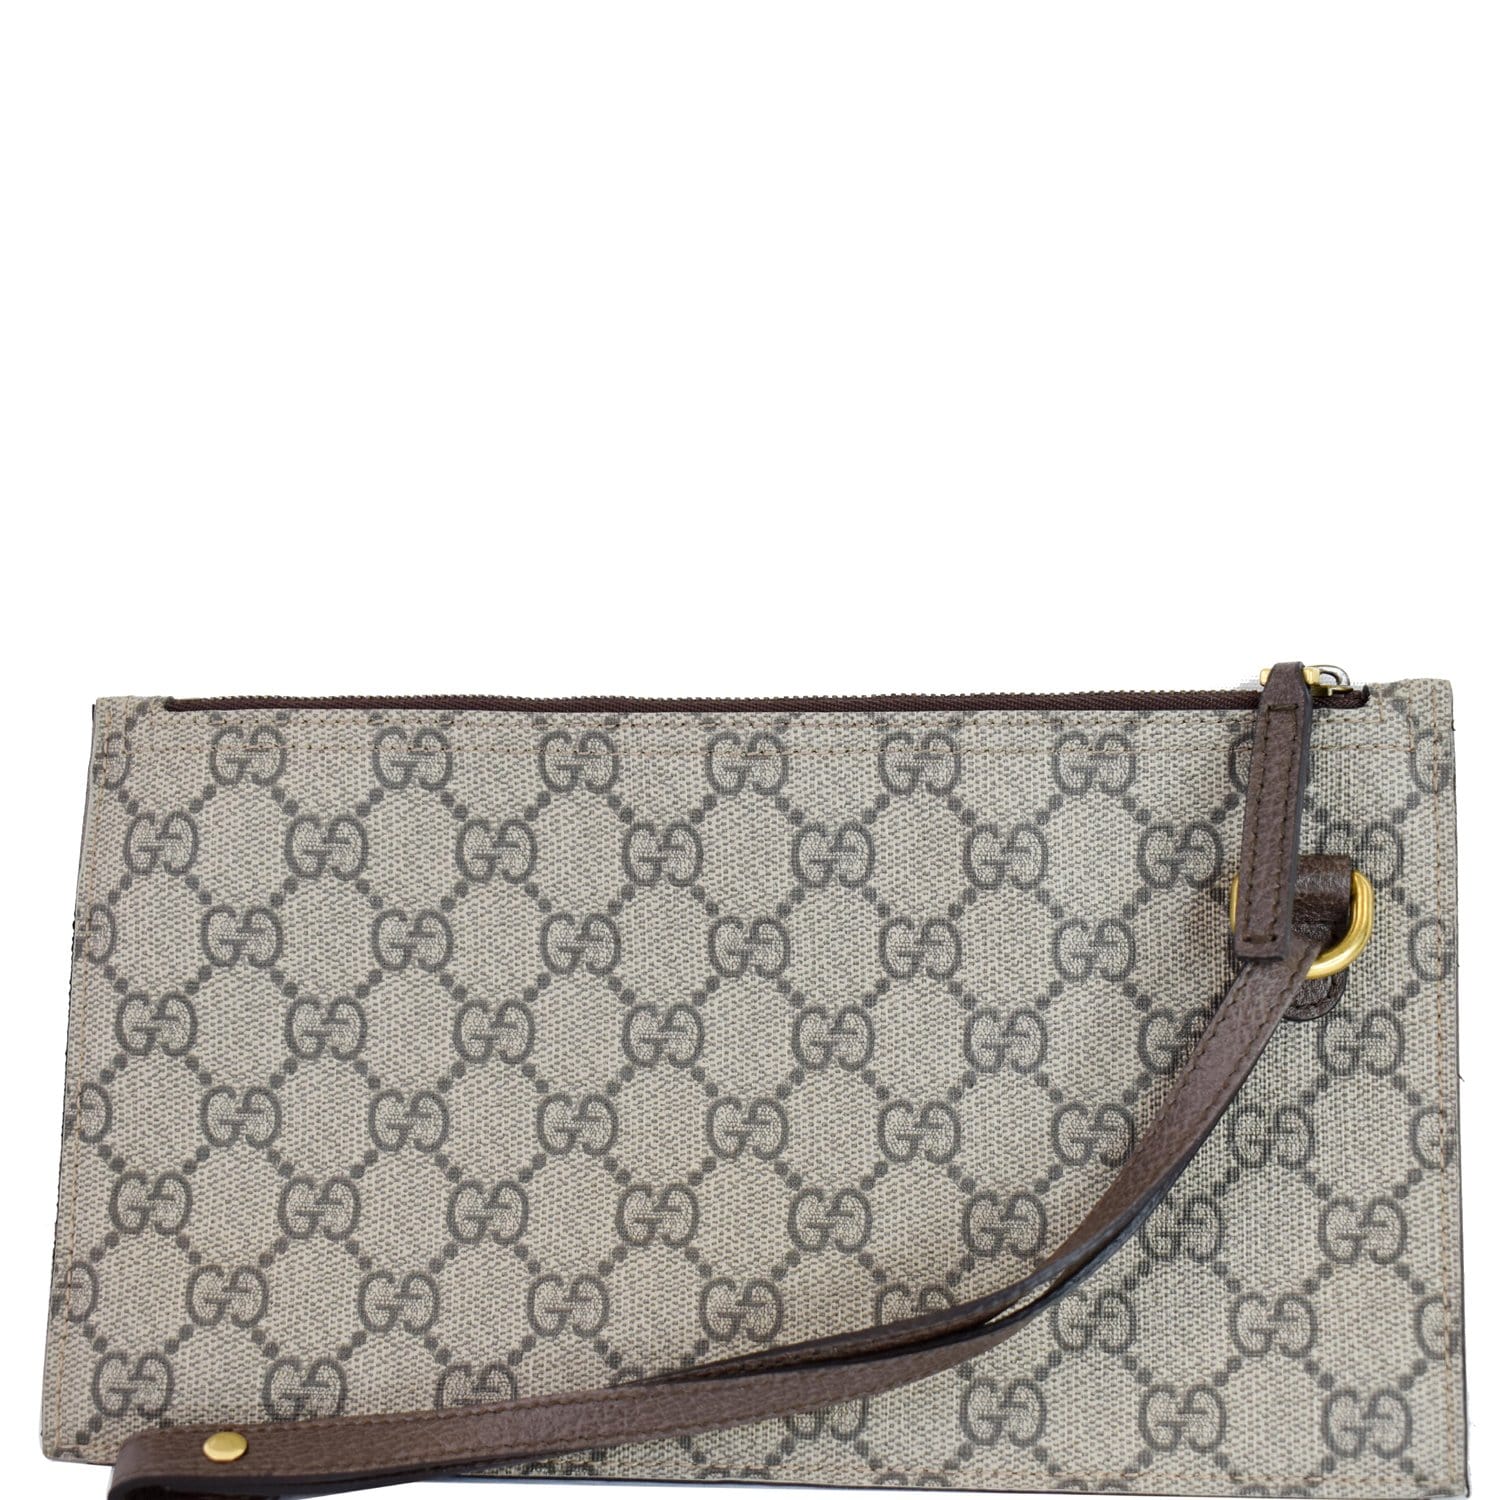 Gucci #574841 Ophidia GG Supreme Zip Top Wristlet Wallet, NWT